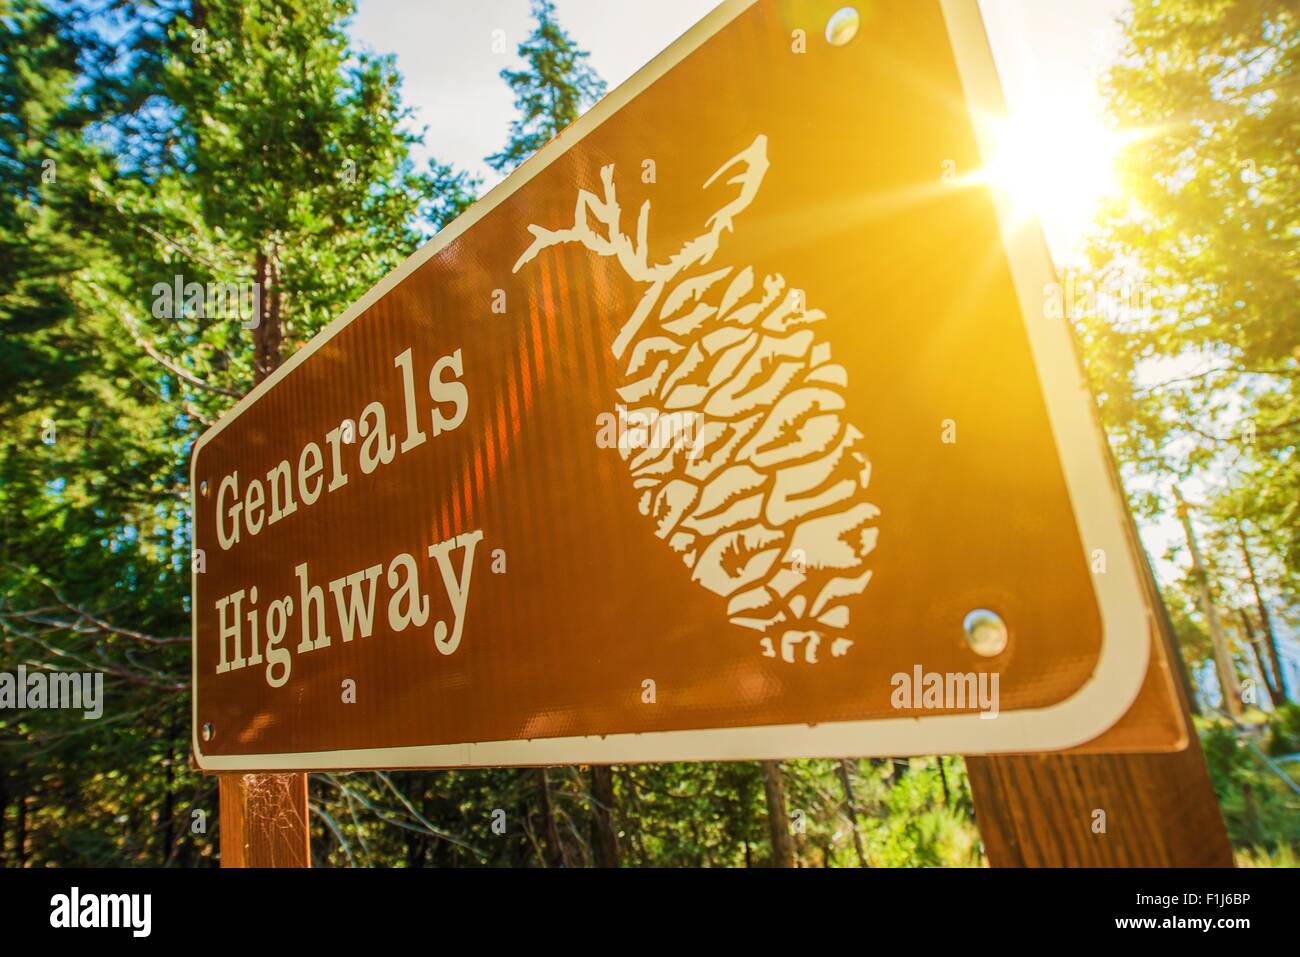 Generals Highway Sign in Sequoia National Park, California, United States. Stock Photo